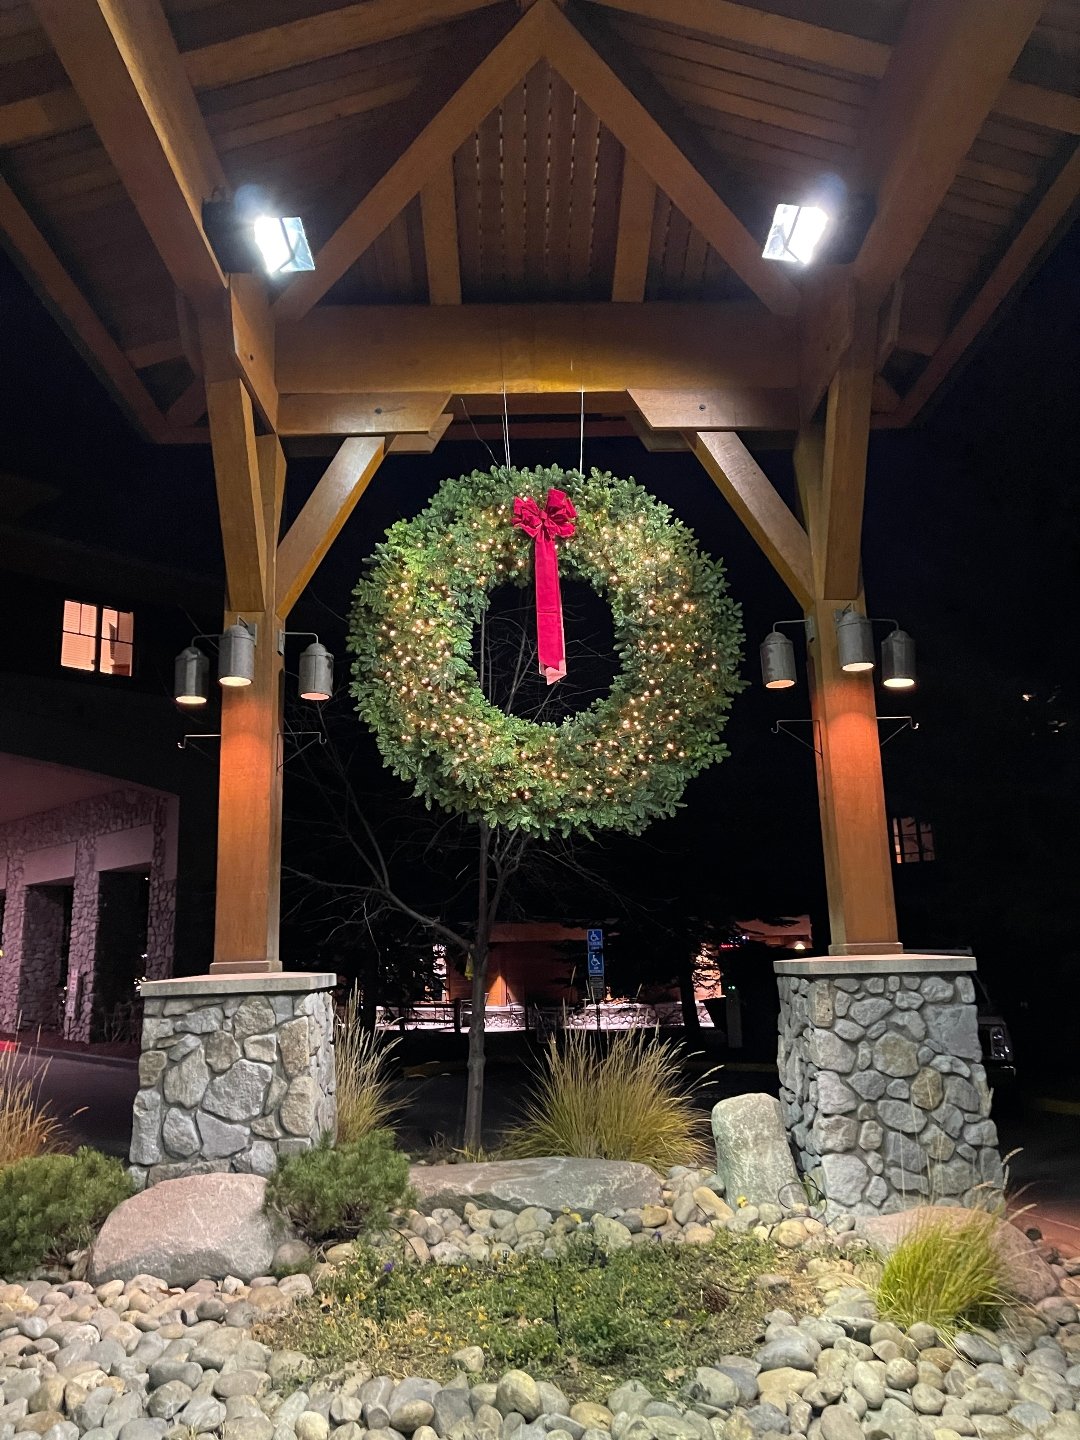 giant wreath in a lodge